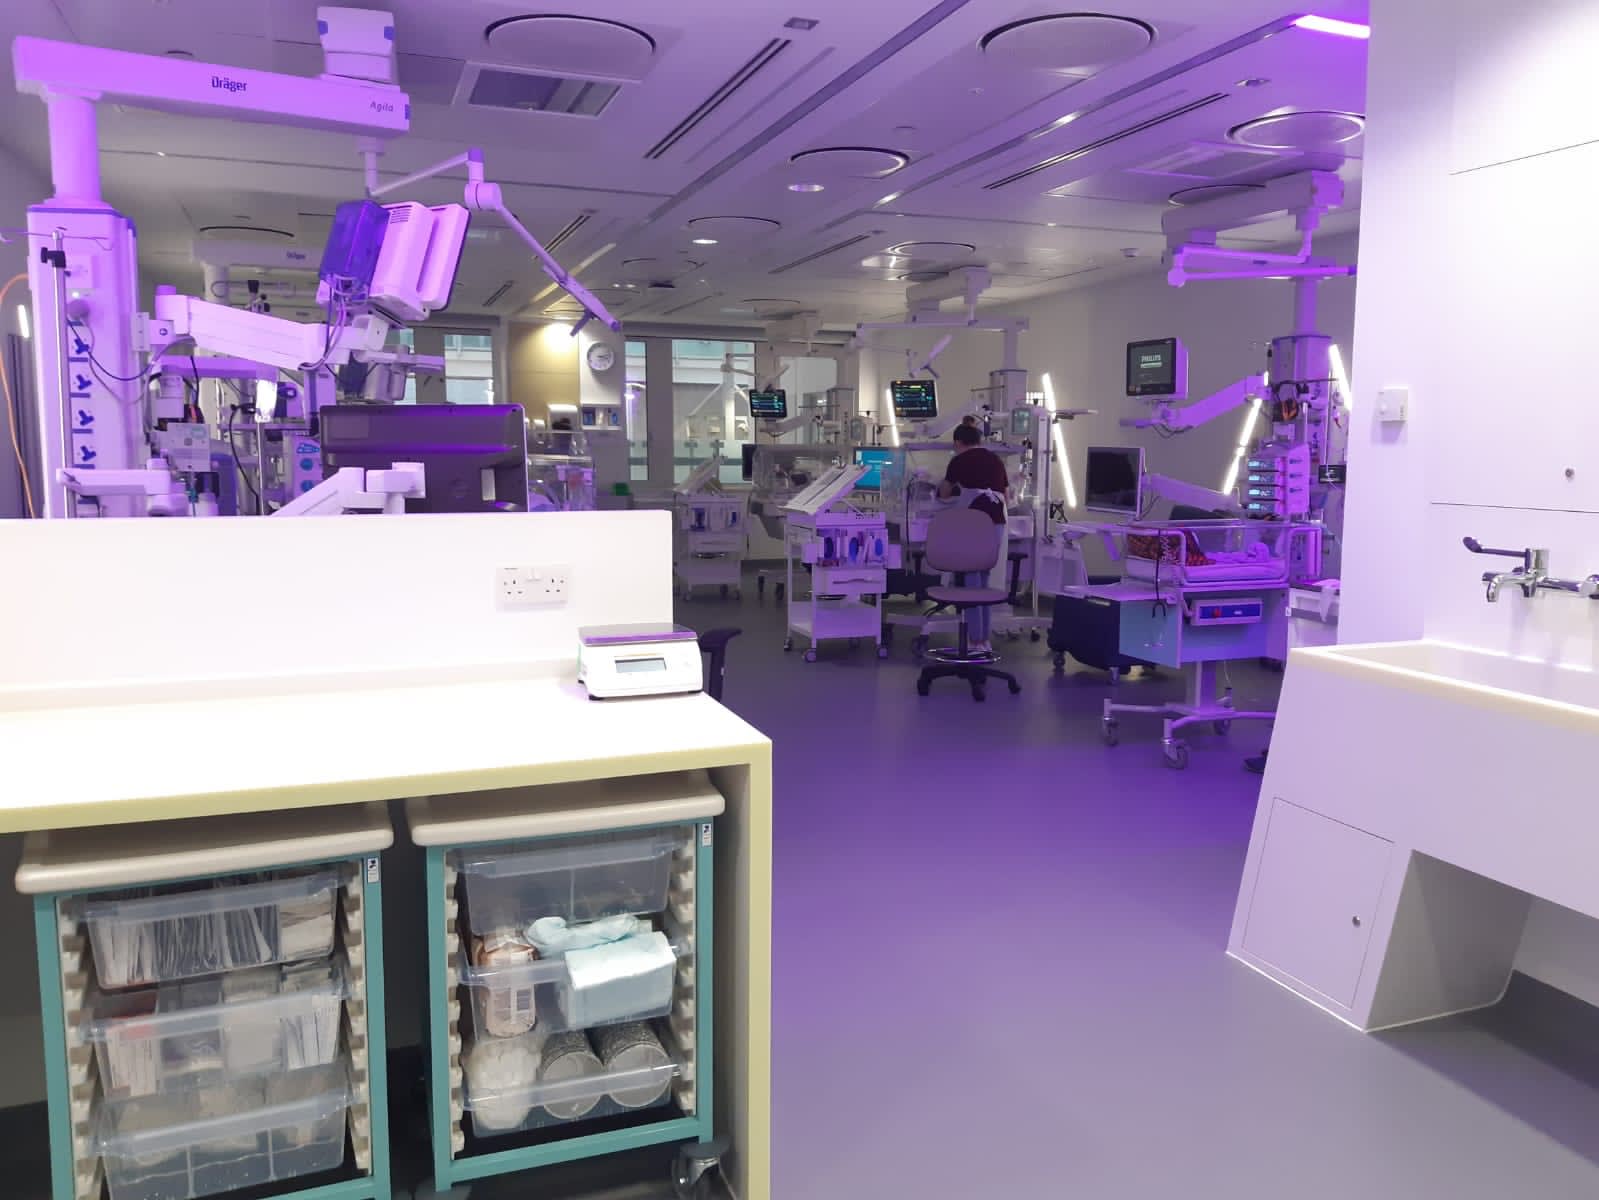 Neonatal Intensive Care Unit (NICU) at Chelsea and Westminster Hospital in London